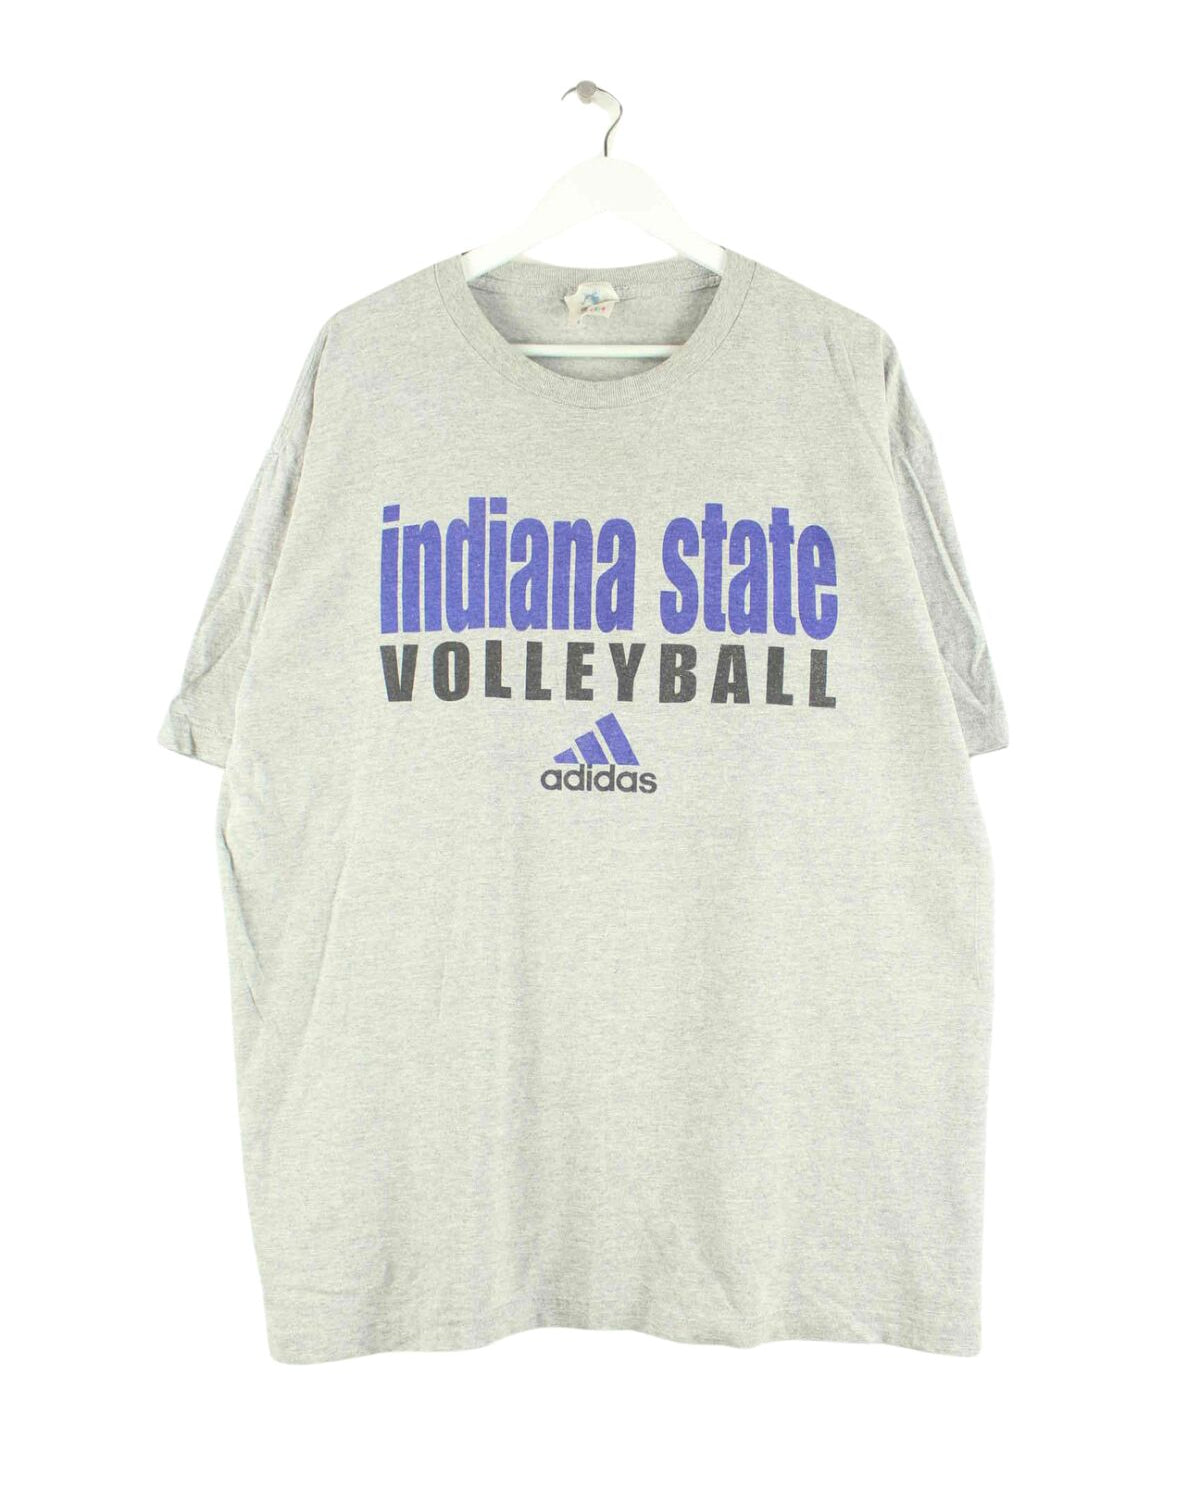 Adidas 90s Vintage Indiana State T-Shirt Grau L (front image)